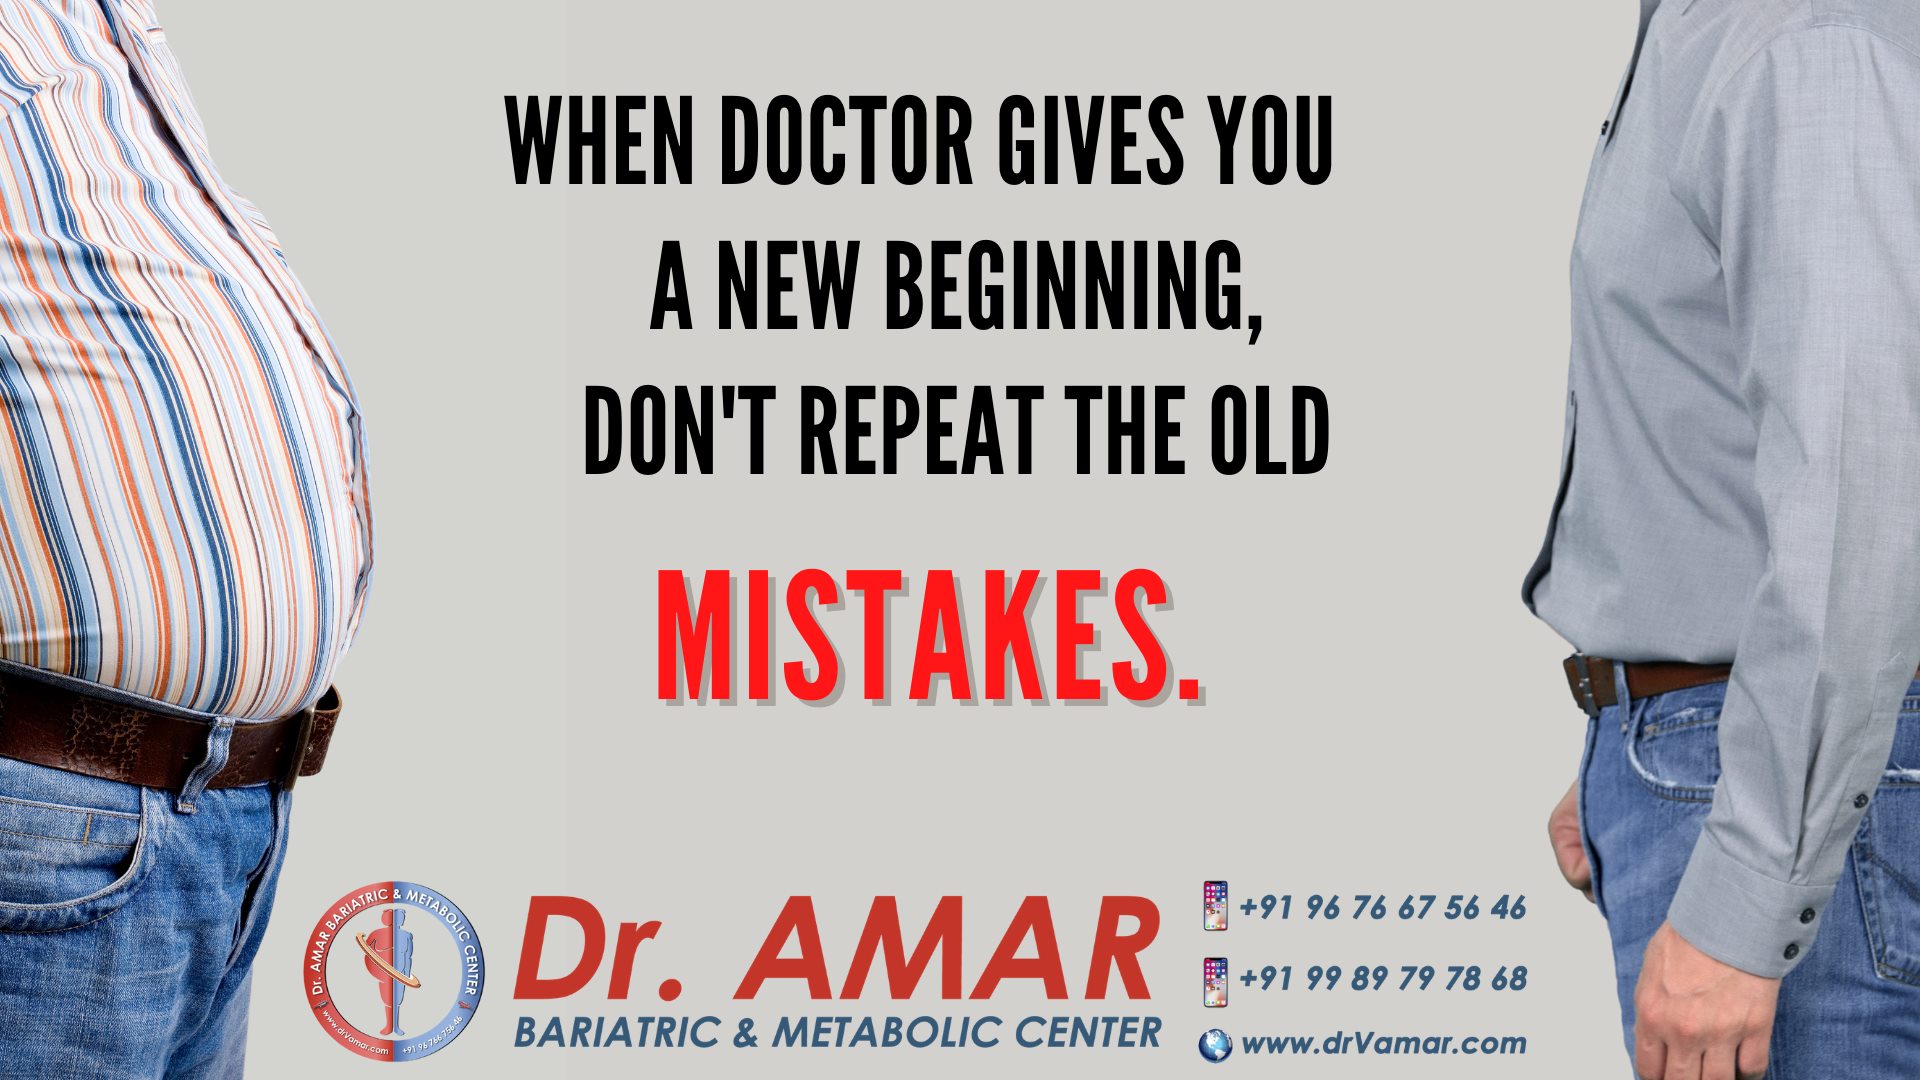 WHEN DOCTOR GIVES YOU A NEW BEGINNING, DON’T REPEAT THE OLD